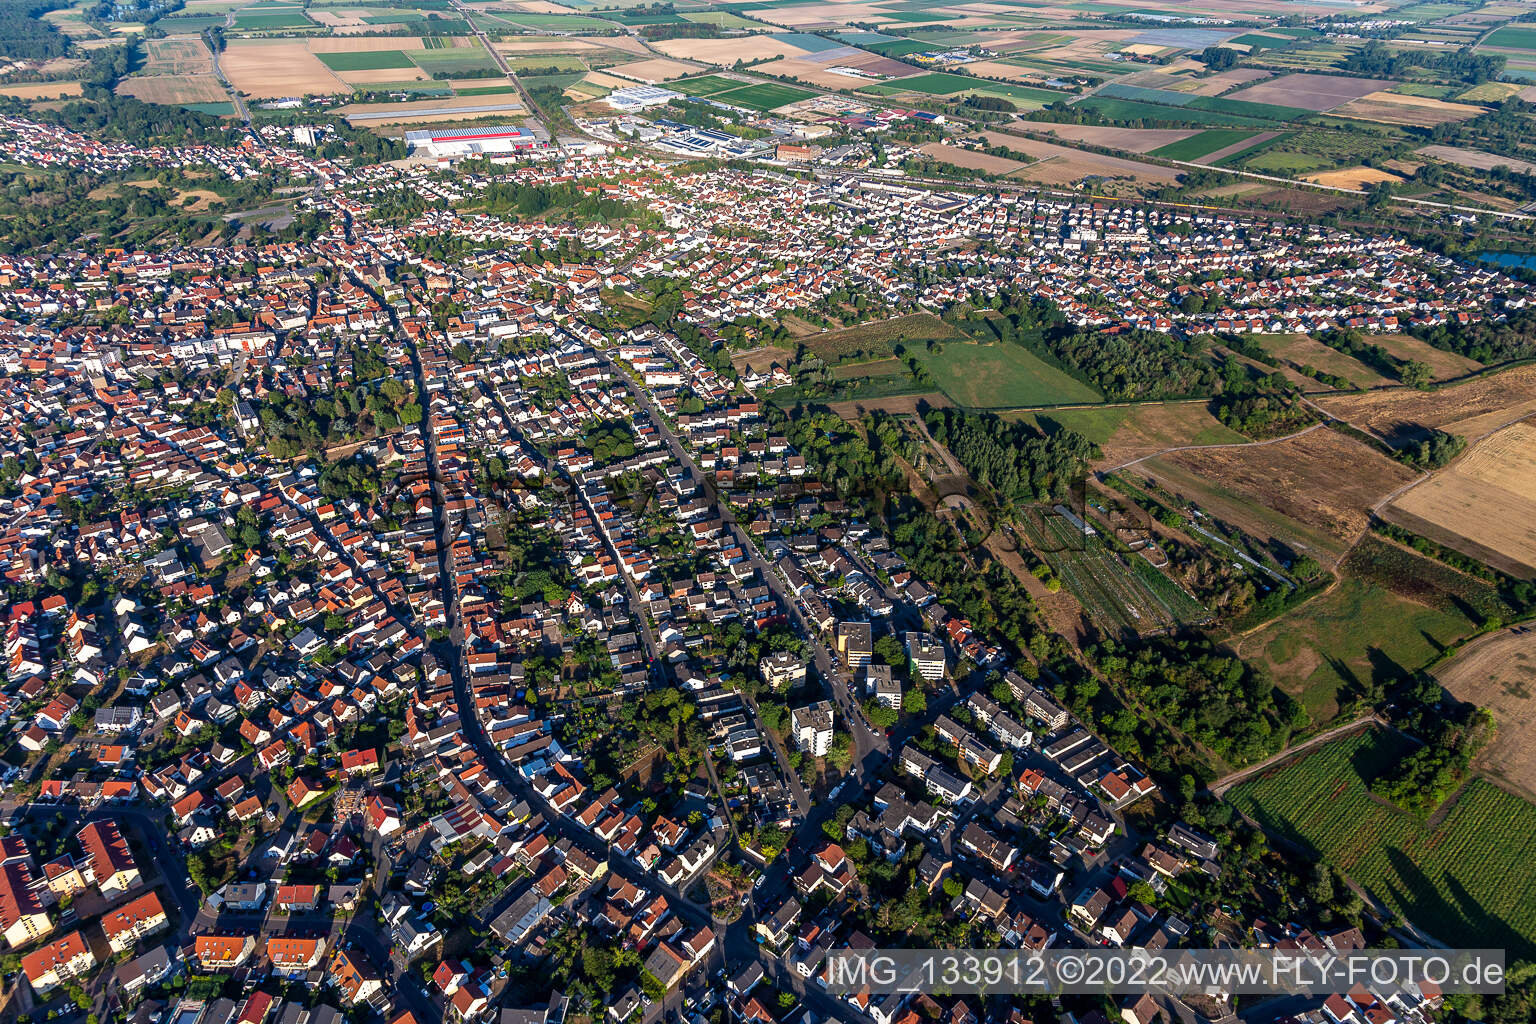 Schifferstadt in the state Rhineland-Palatinate, Germany out of the air